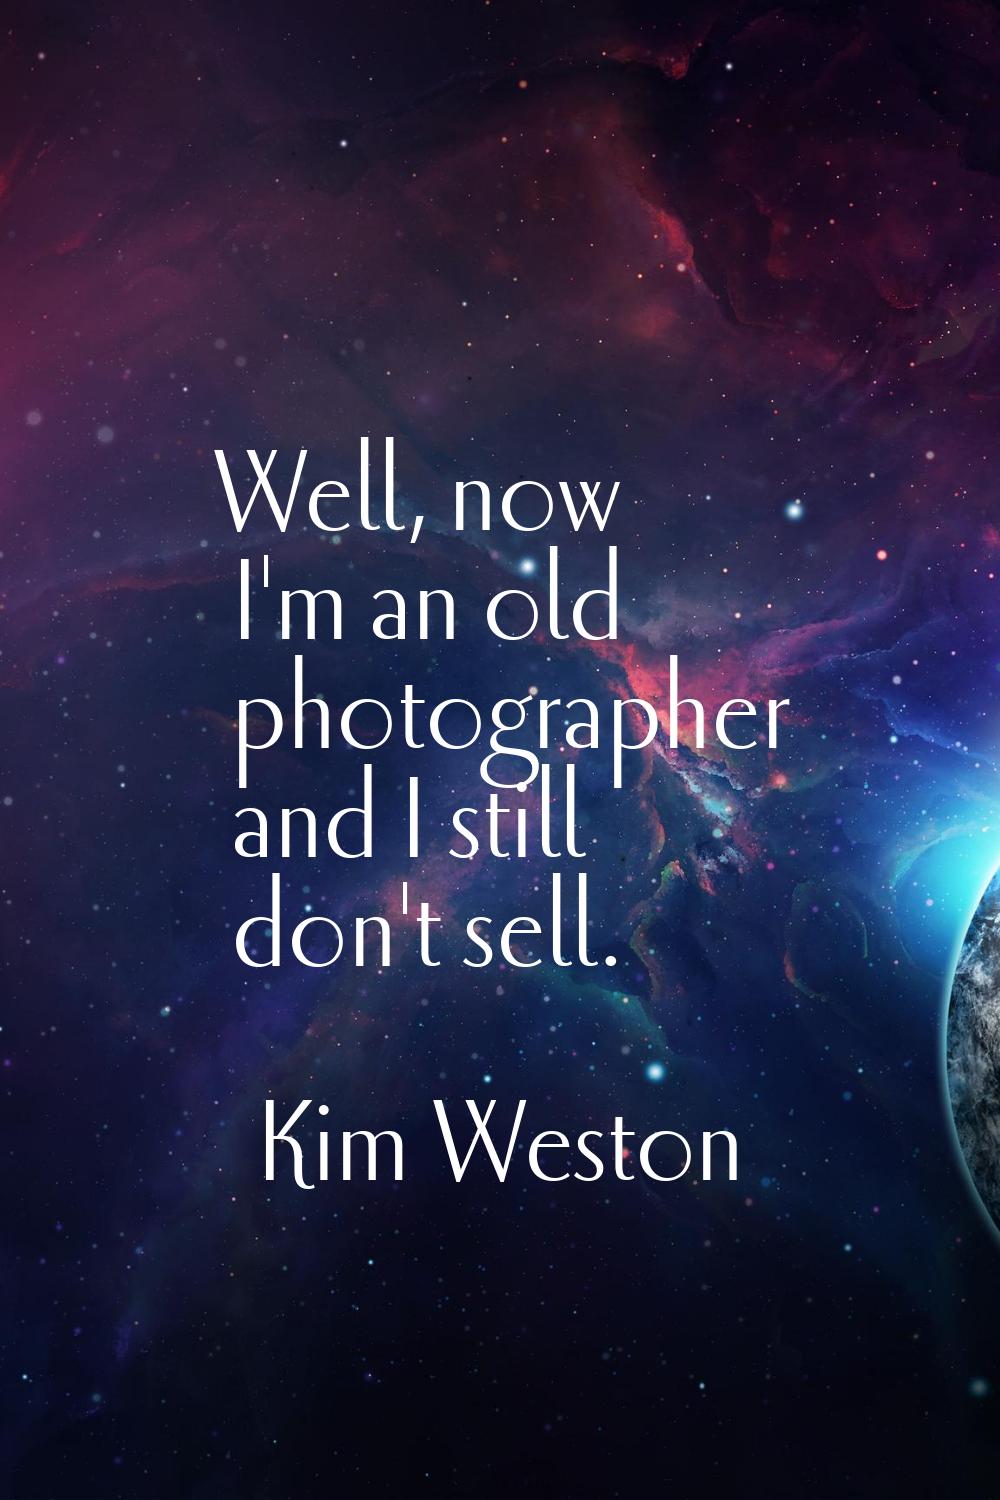 Well, now I'm an old photographer and I still don't sell.